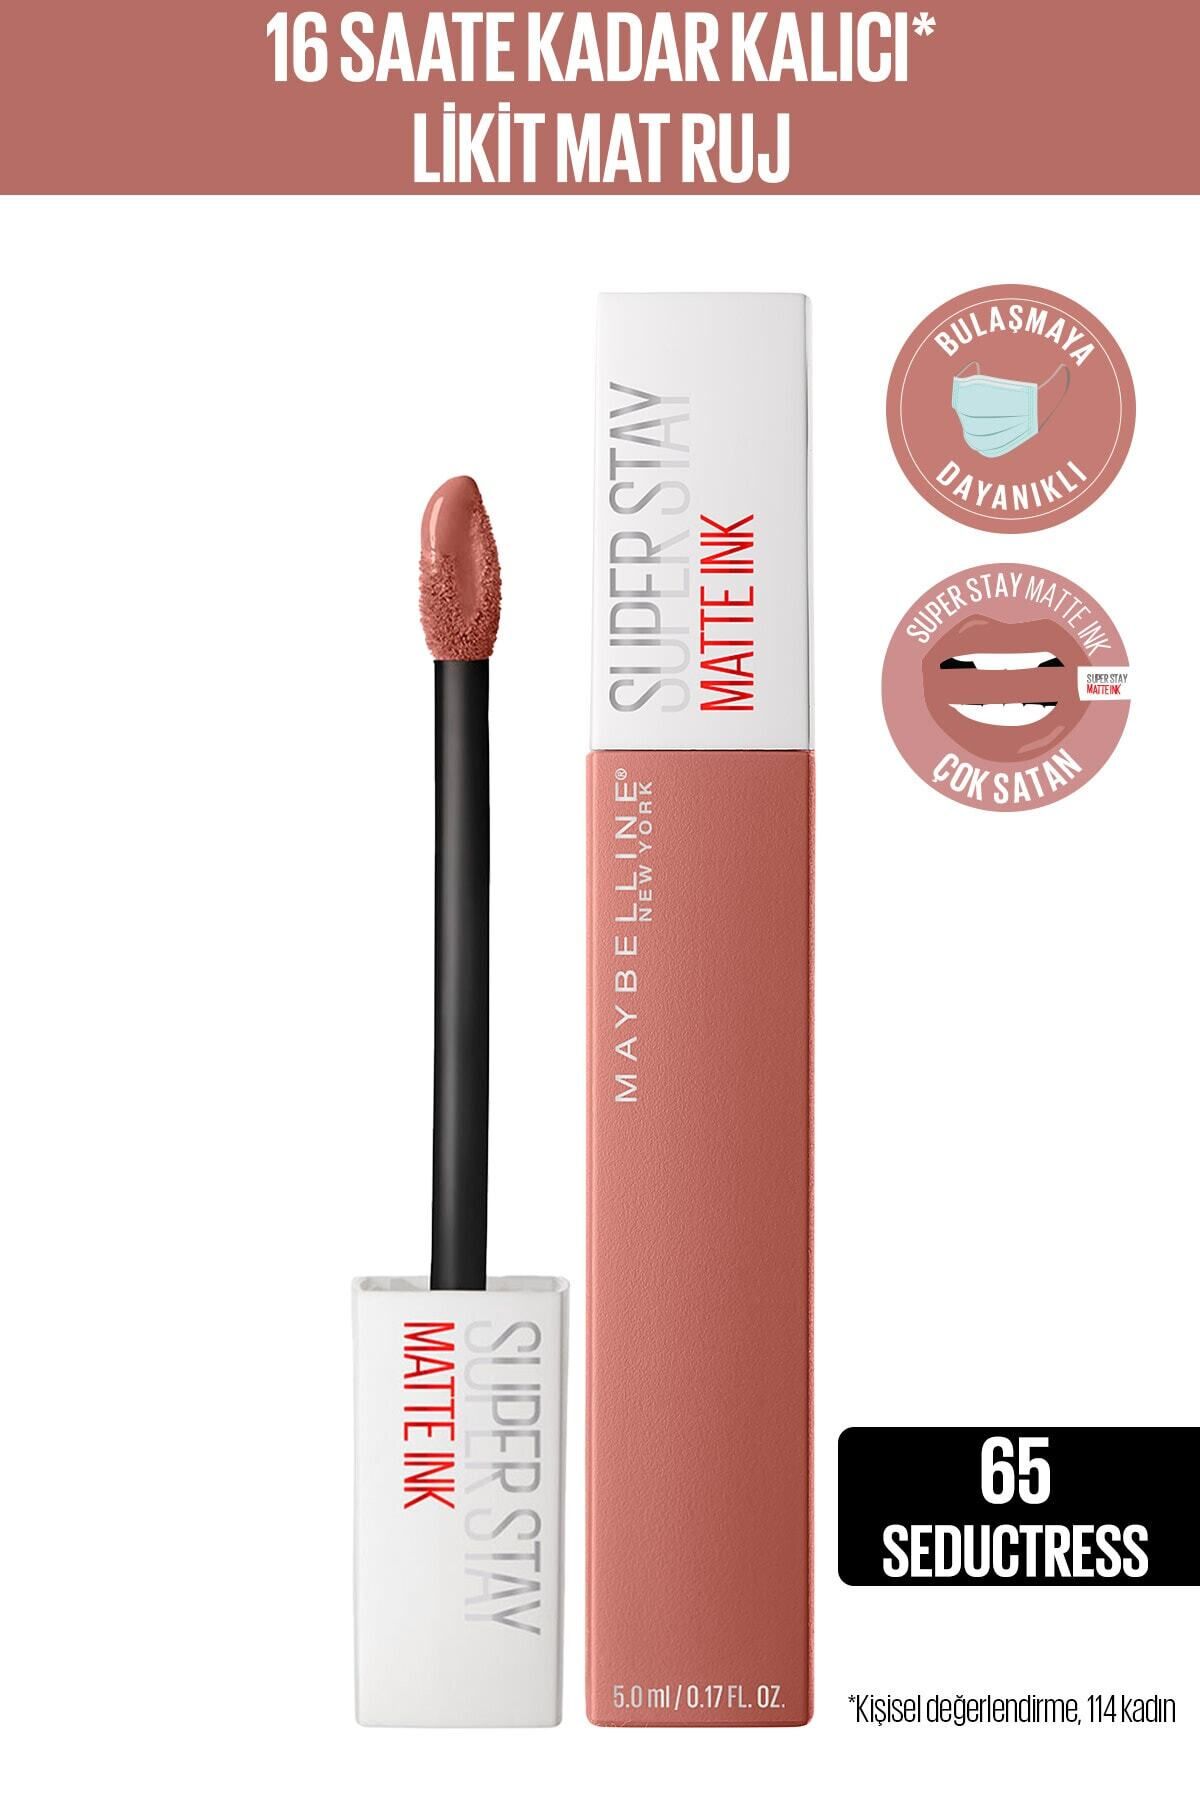 Maybelline New York Super Stay Matte Ink Unnude Likit Mat Ruj - 65 Seductress